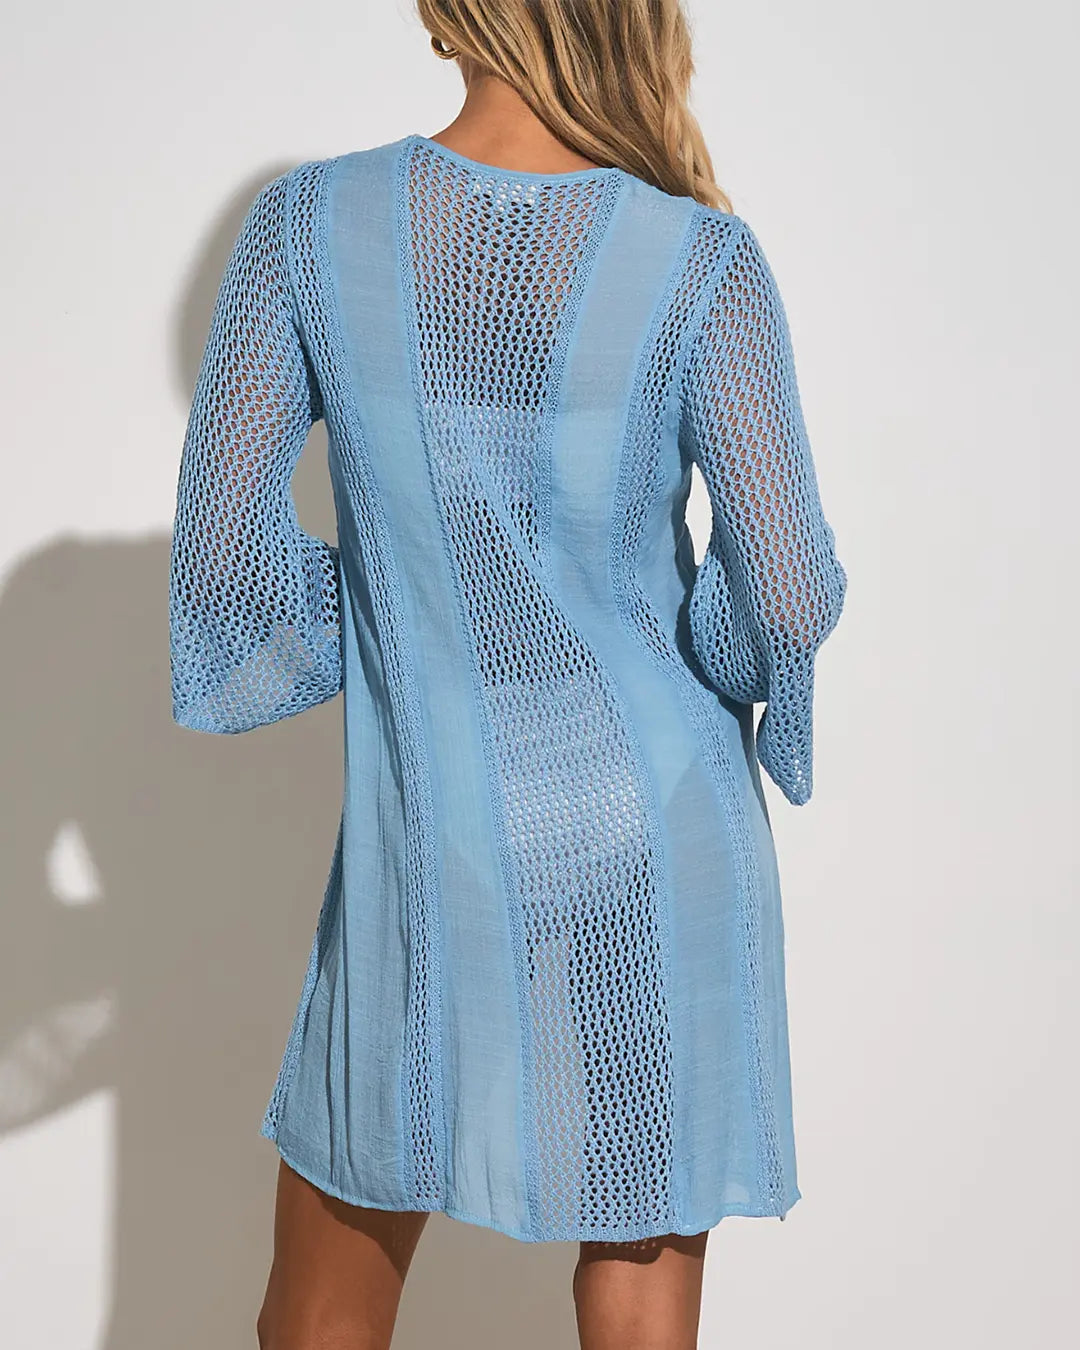 Elevate your beach look with our chic Blue 3/4 Length Sleeve Crochet Cover-Up, perfect for adding a touch of boho elegance to your swimwear ensemble. Crafted with intricate crochet detailing and featuring versatile 3/4 length sleeves, this cover-up is a must-have accessory for your next seaside adventure.